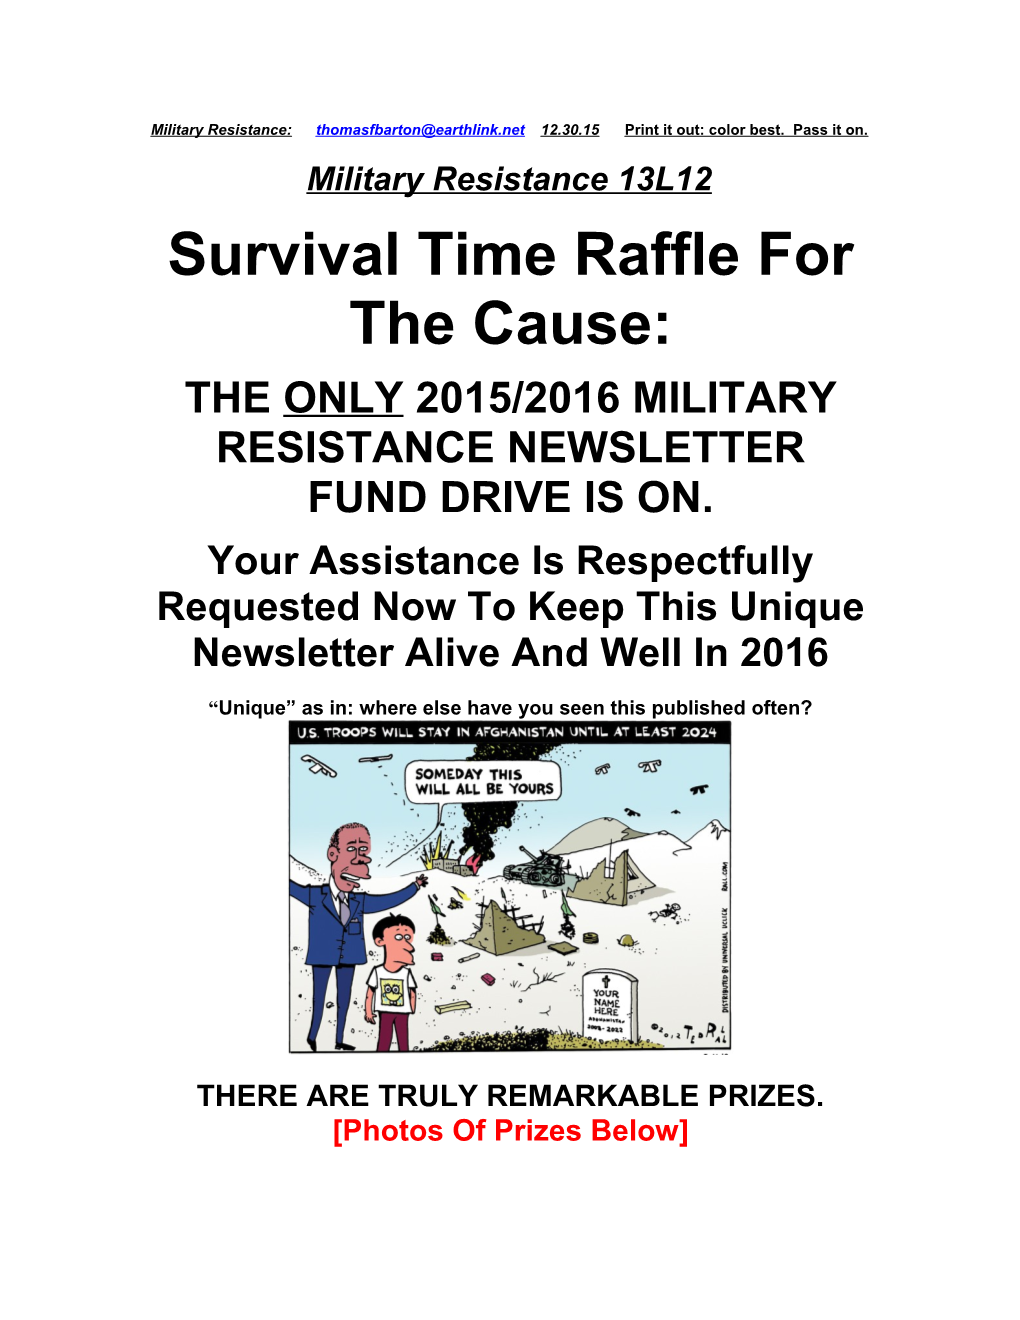 Survival Time Raffle for the Cause